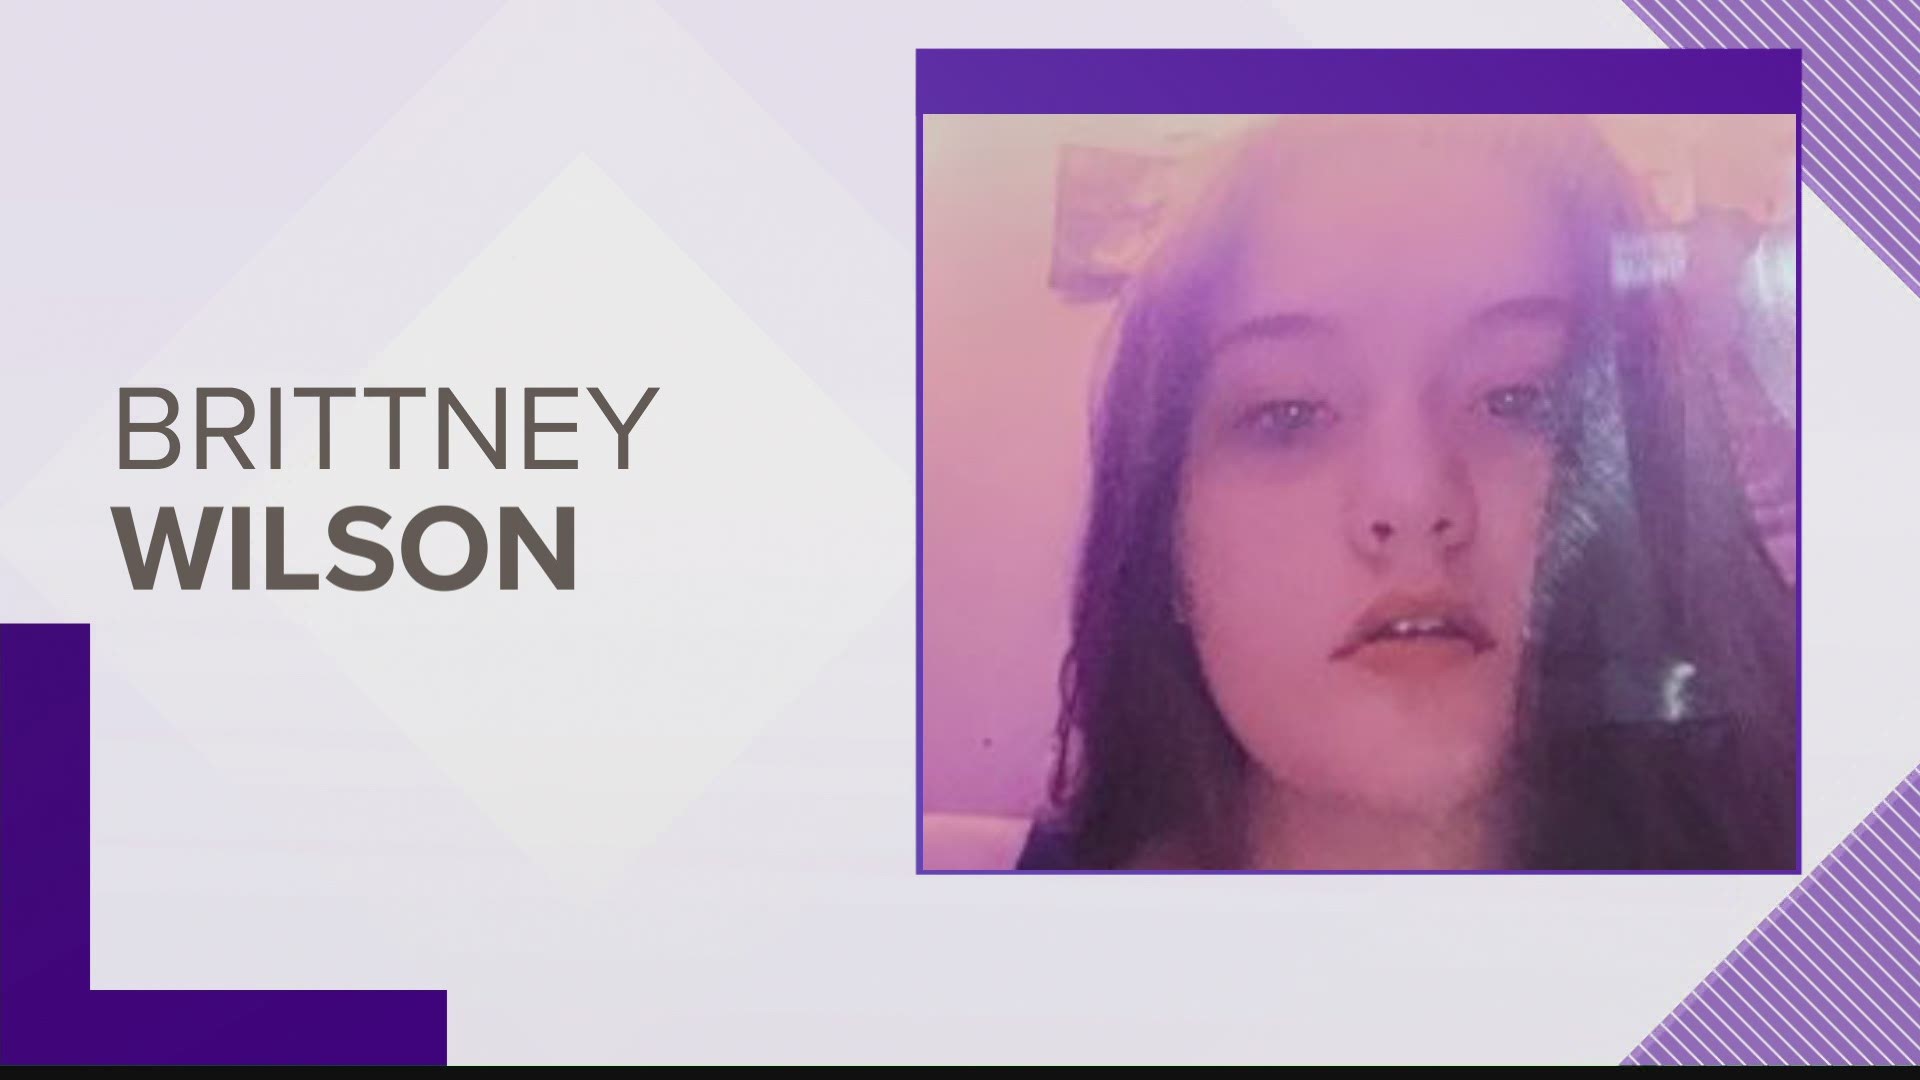 Police say it’s believed Brittney Wilson snuck out of her grandparents' home in Somerville Saturday night